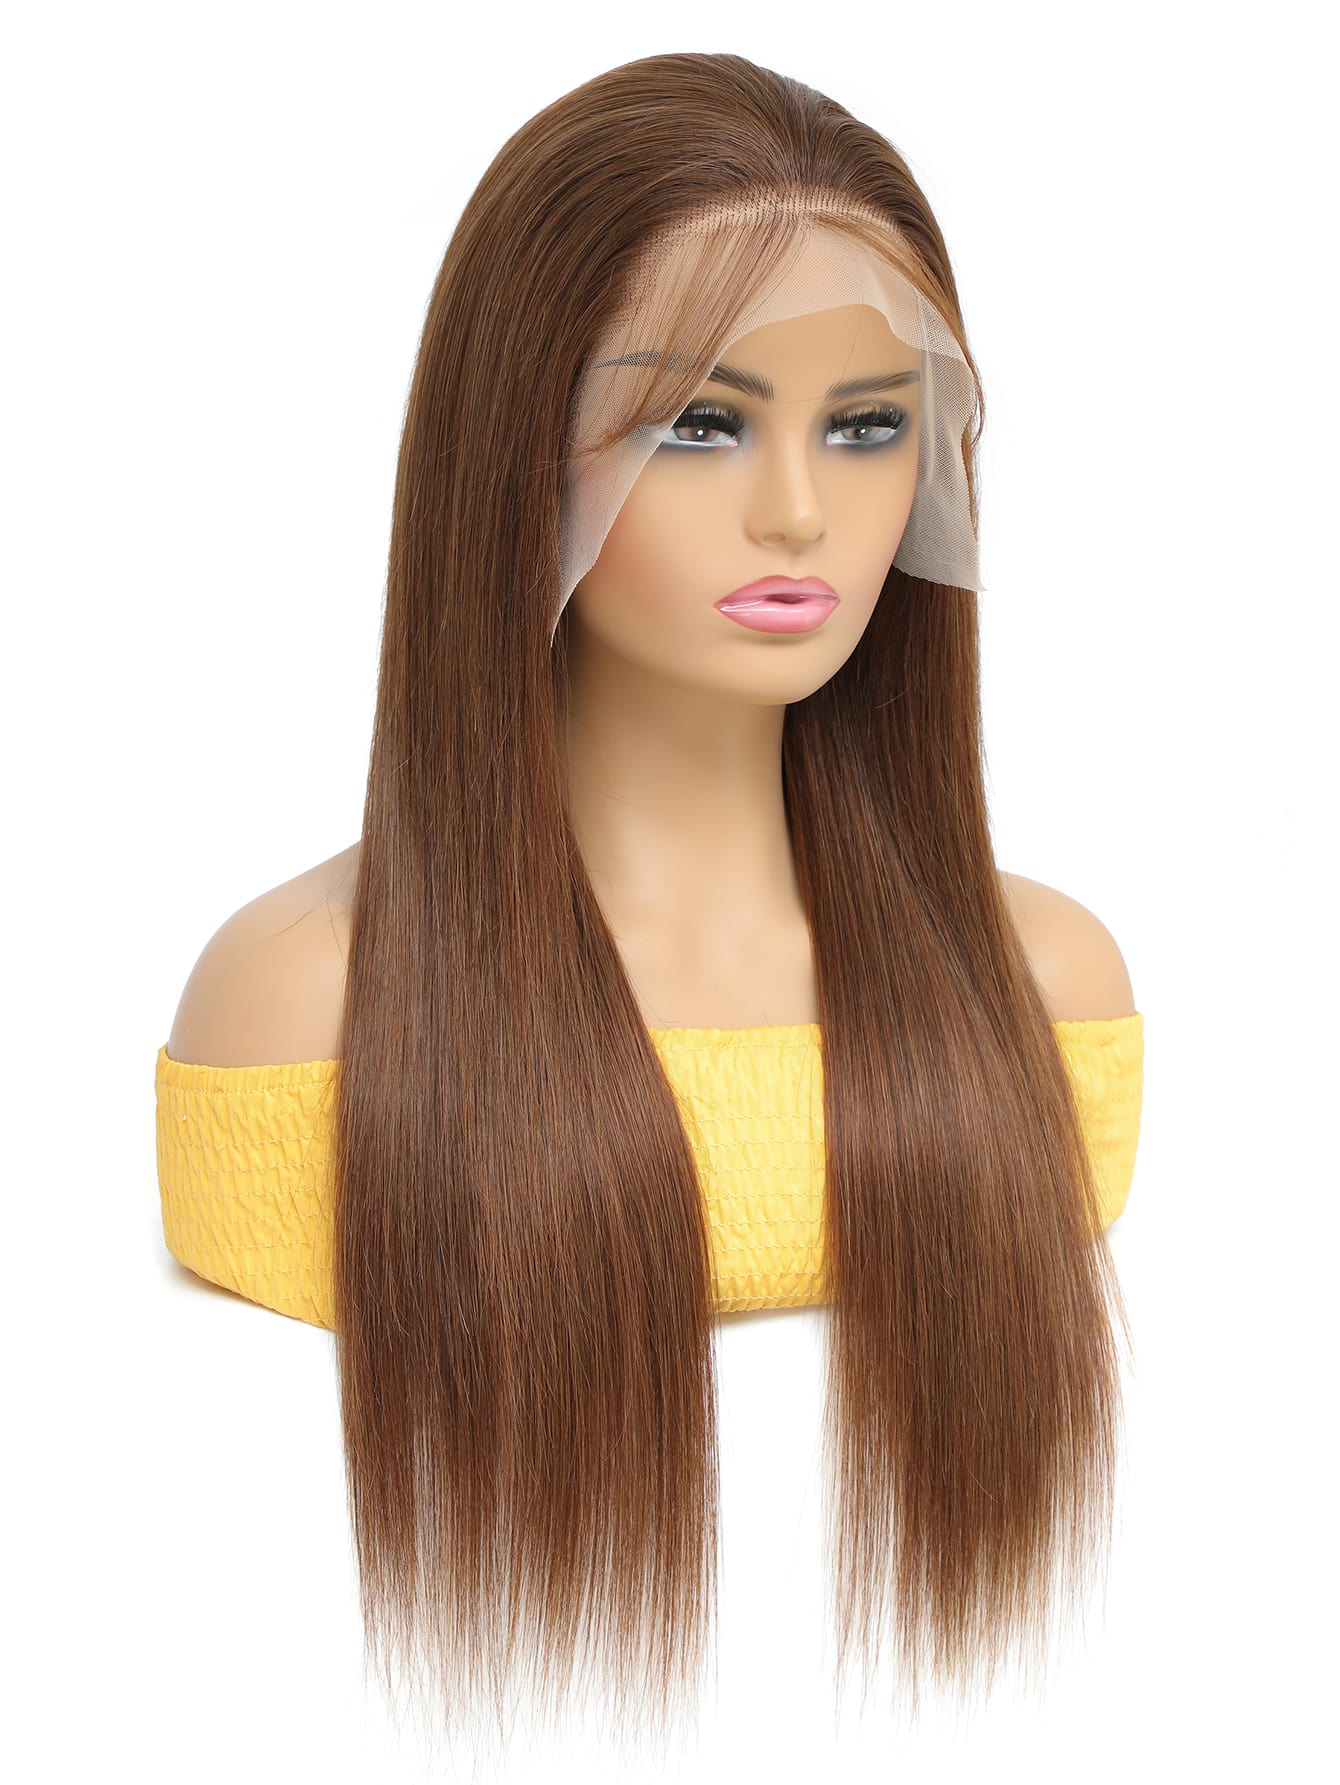 Medium Brown Color 4# Transparent 13 X 4 Lace Frontal Wig Virgin Human Hair Pre Plucked Hair Line Reddish Color Swiss Lace Front Wigs 180% High Density